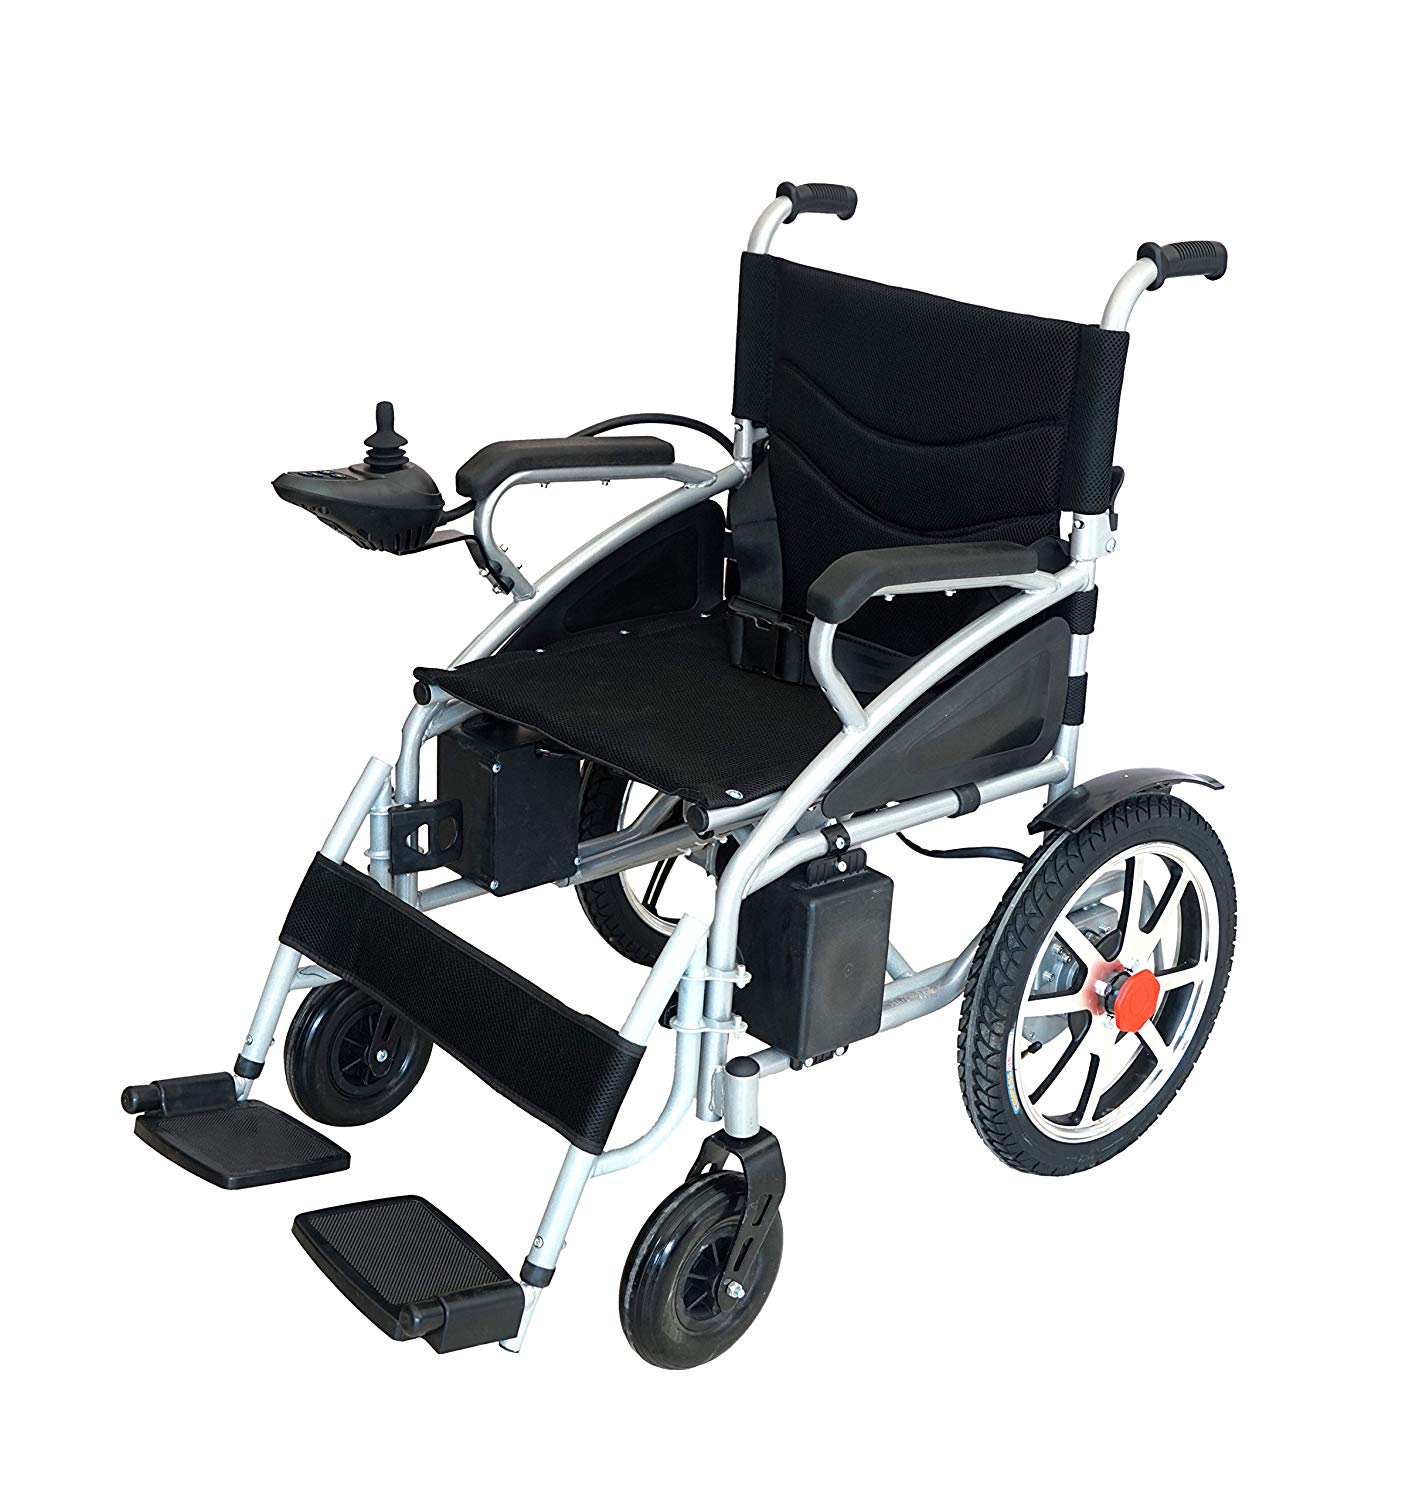 What is a power wheelchair?